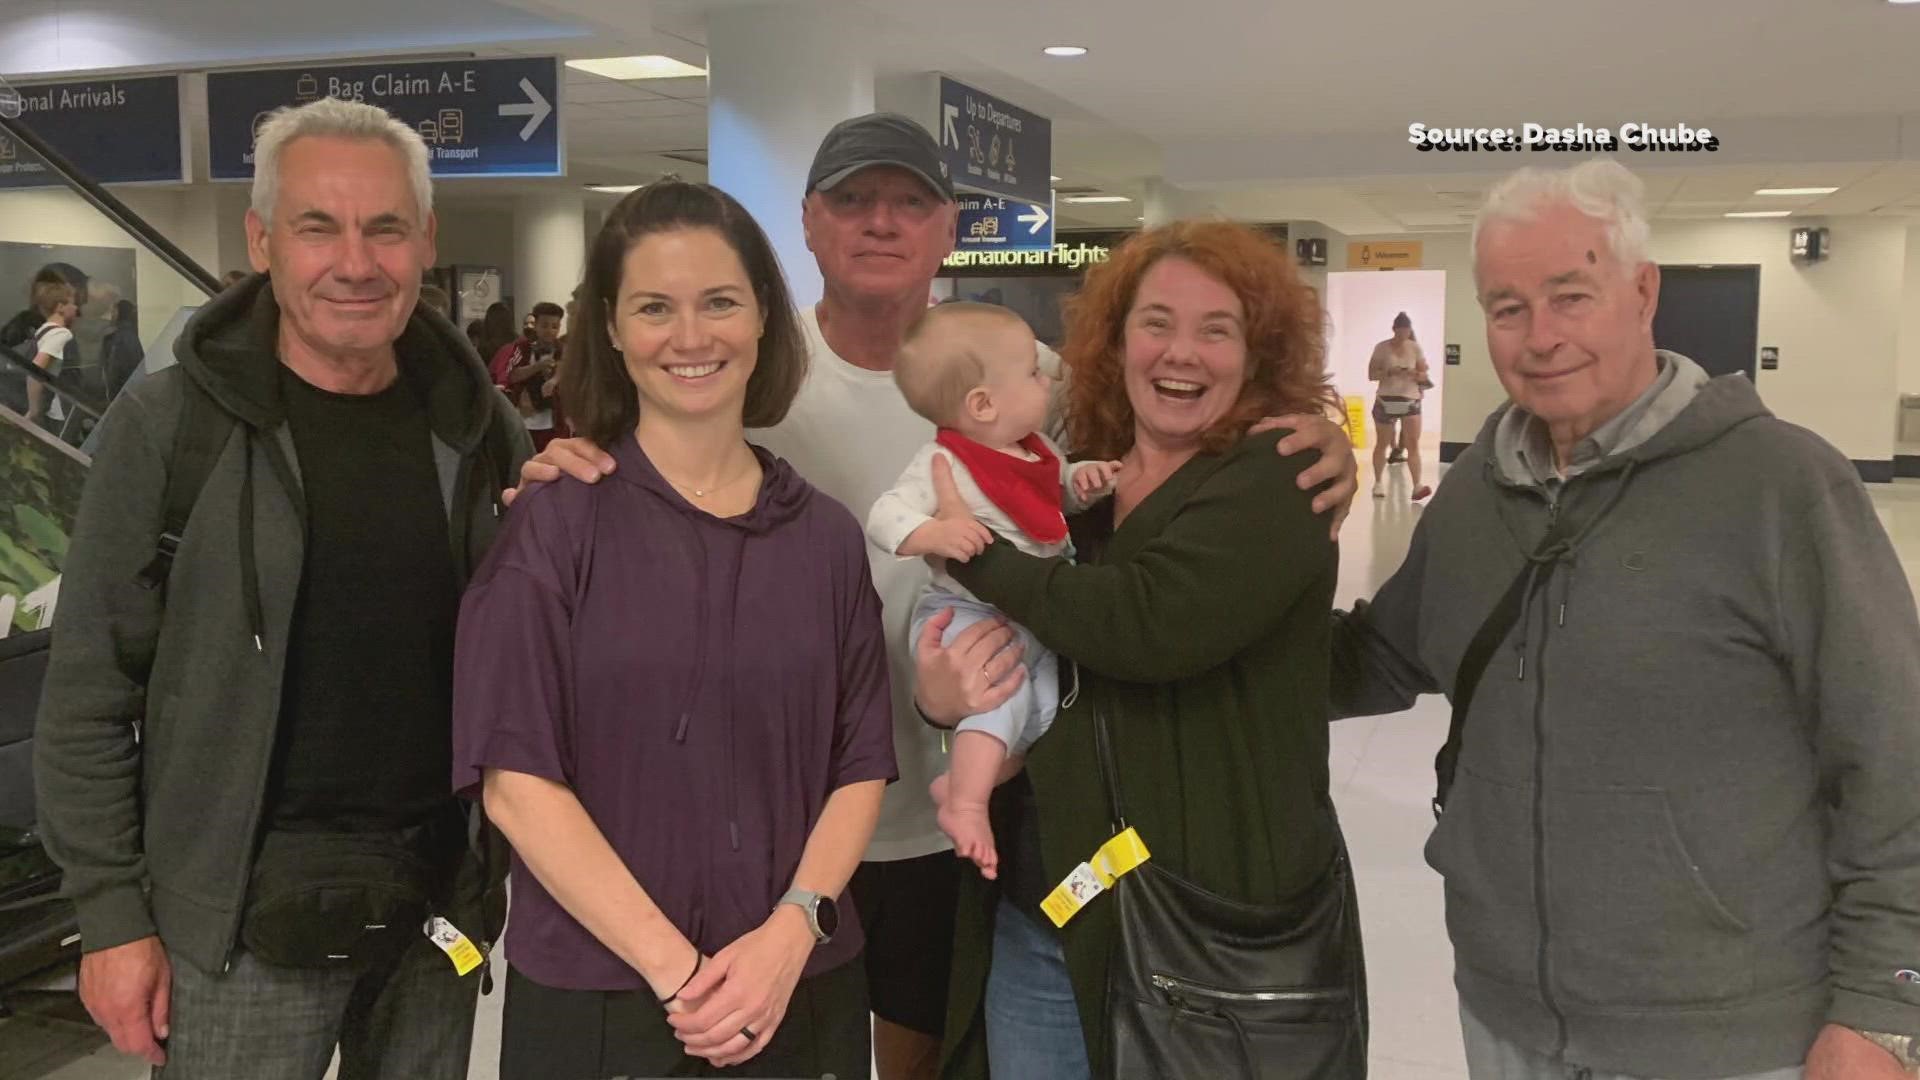 A Greensboro woman is reunited with her family from Ukraine after working for months to get them to the United States.